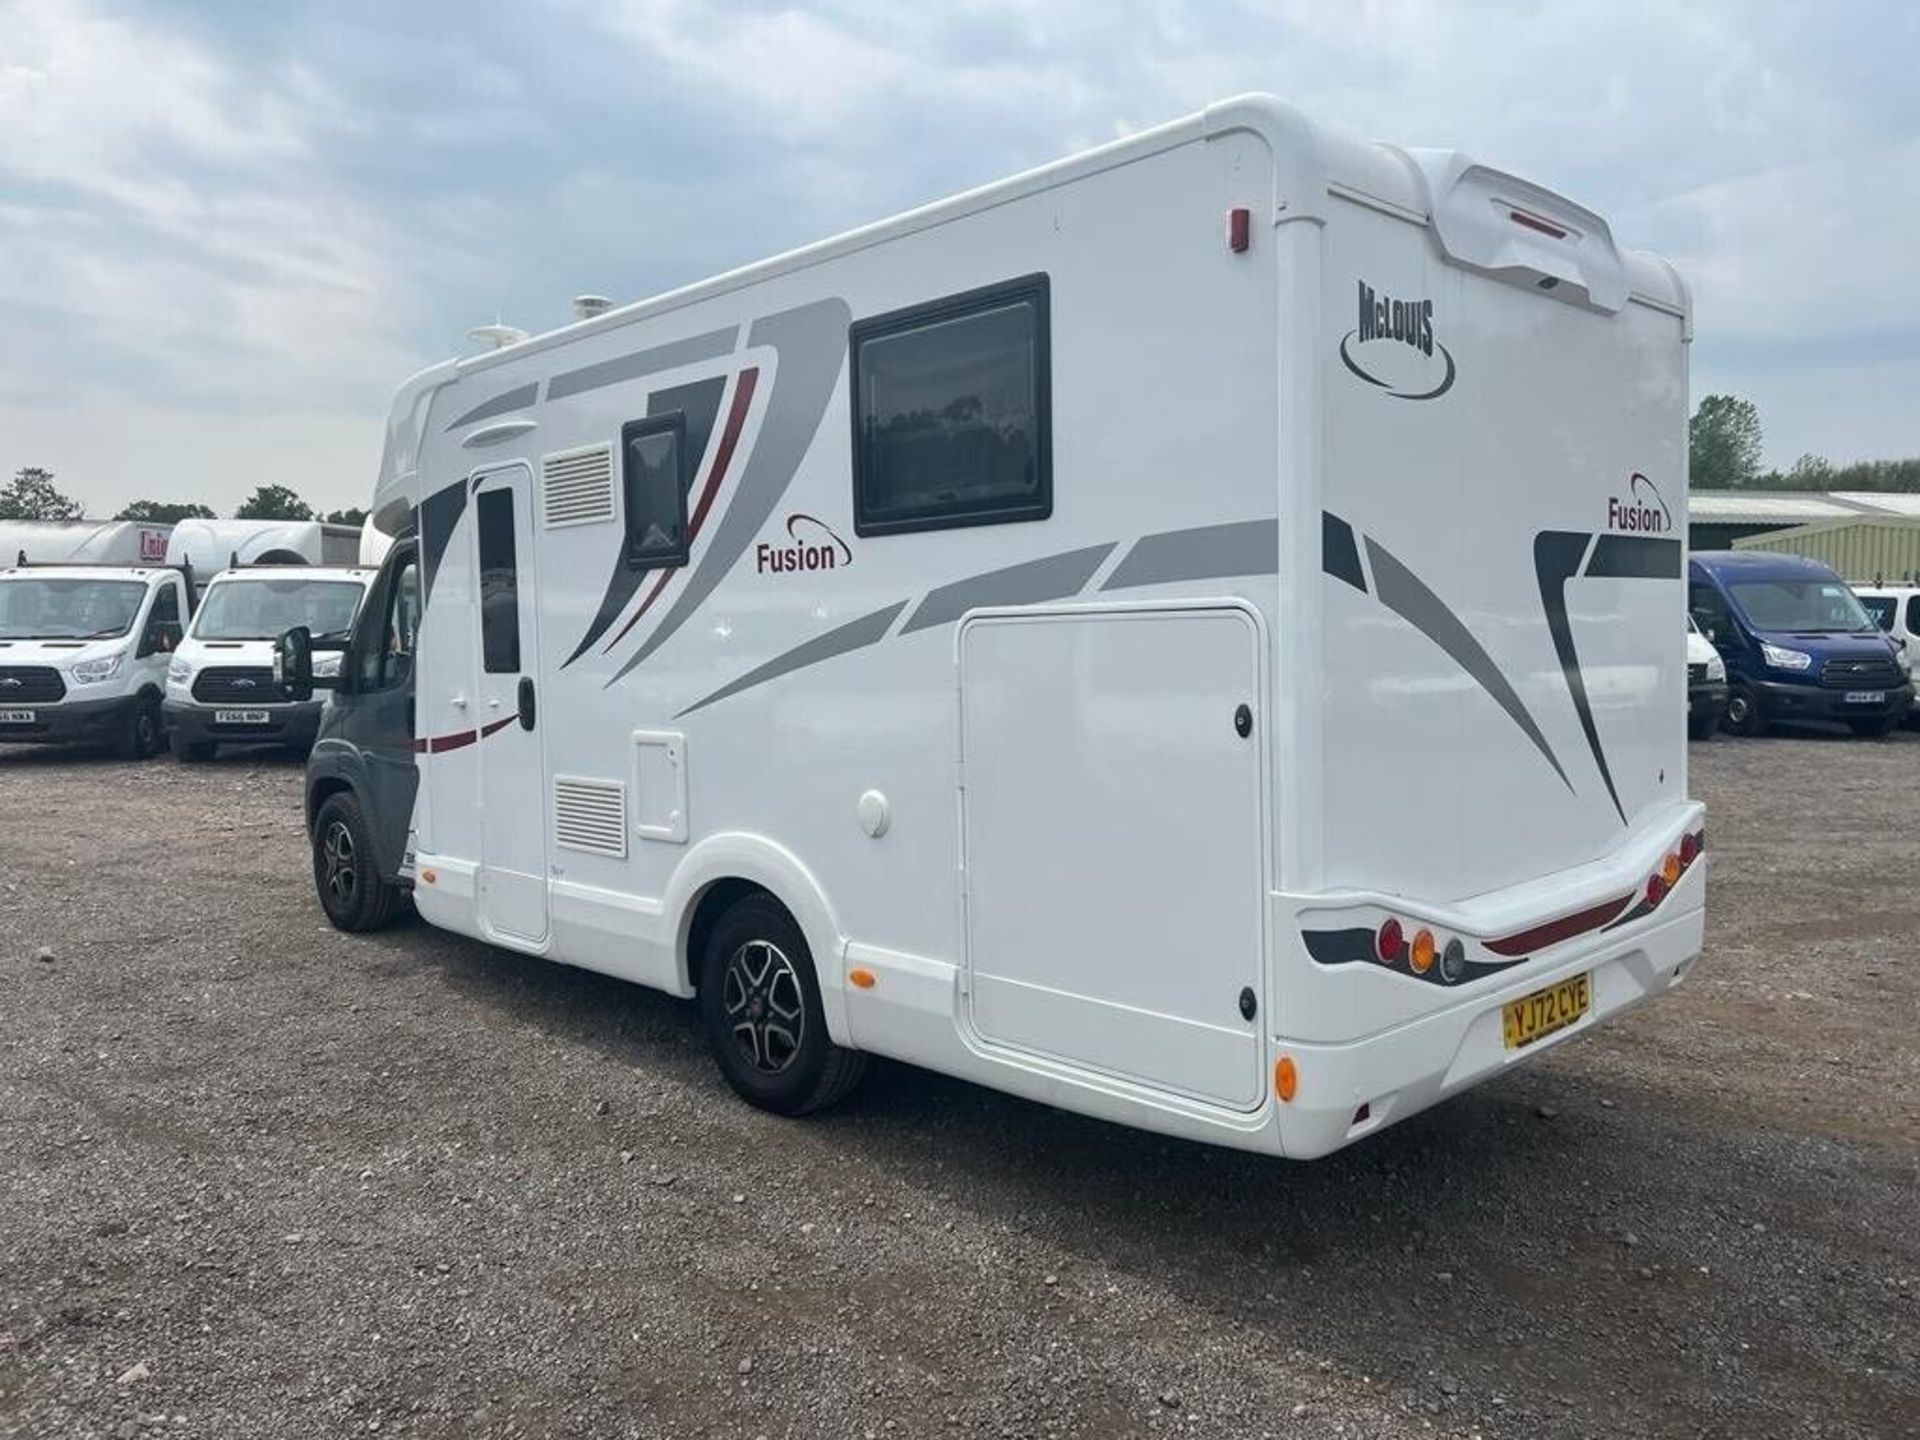 72 PLATE - ONLY 750 MILES! FIAT MCLOUIS FUSION 367: IMMACULATE MOTORHOME JOY >NO VAT ON HAMMER< - Image 12 of 15